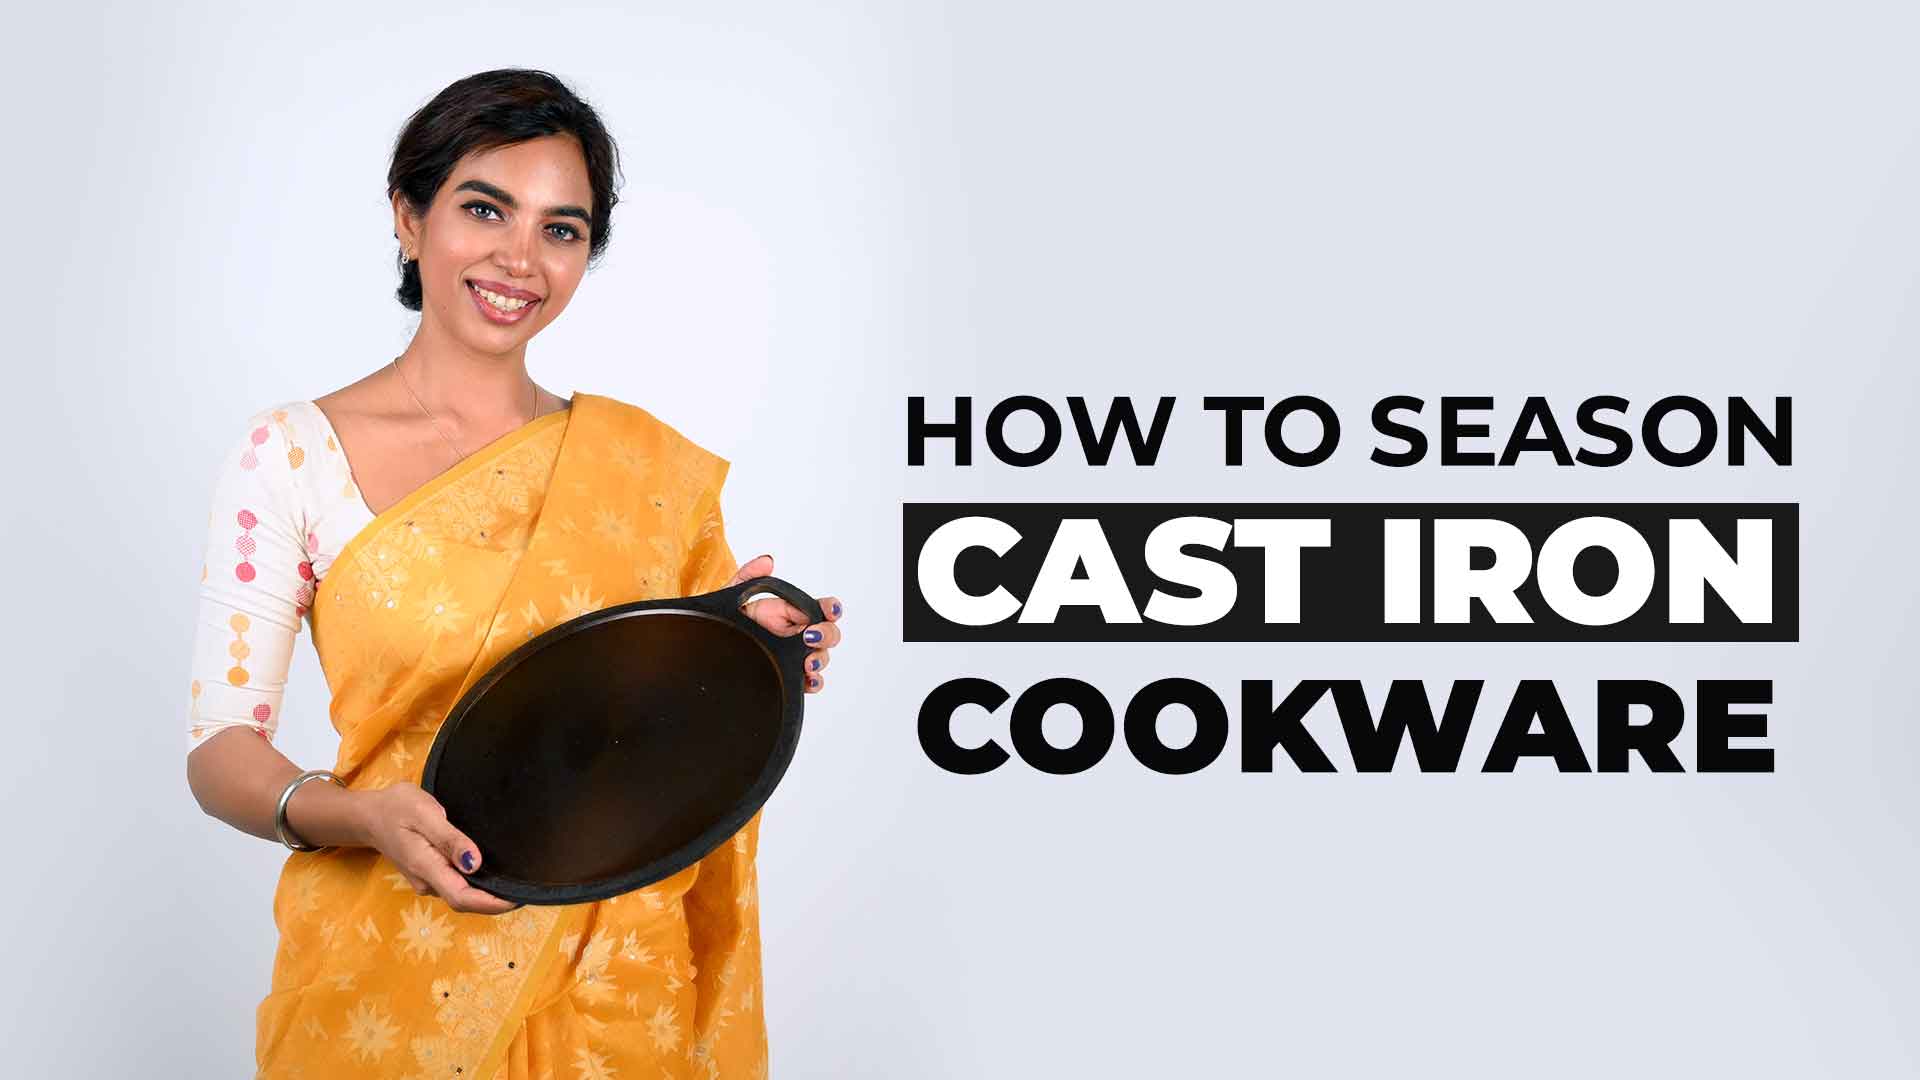 HOW TO SEASON A CAST IRON COOKWARE?